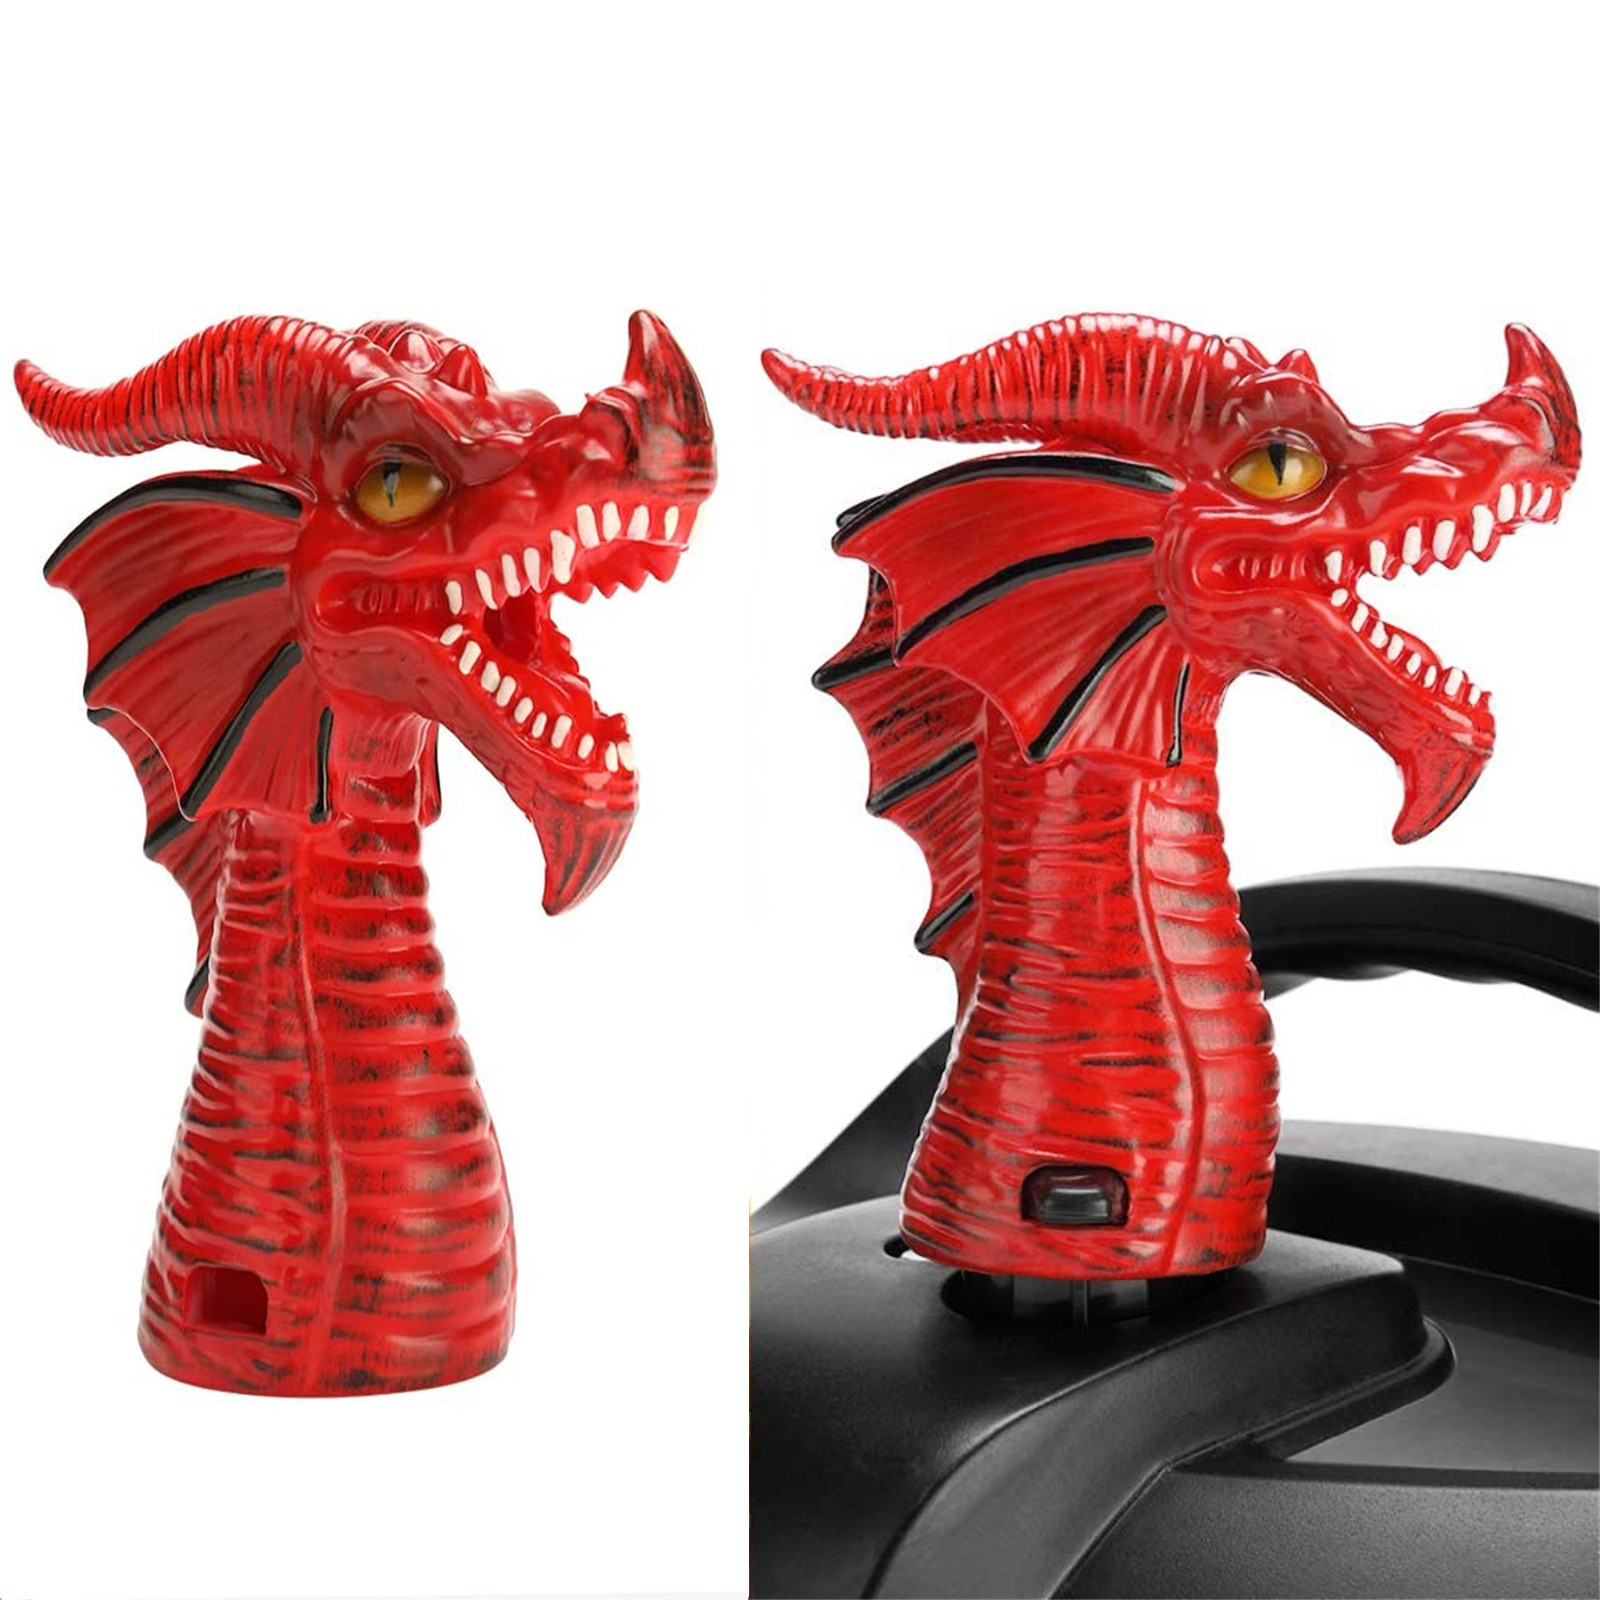 Cookware Parts Fire-breathing Dragon Steam Release Accessory Steam Diverter for Pressure Instant Cooker Kitchen Supplies B13